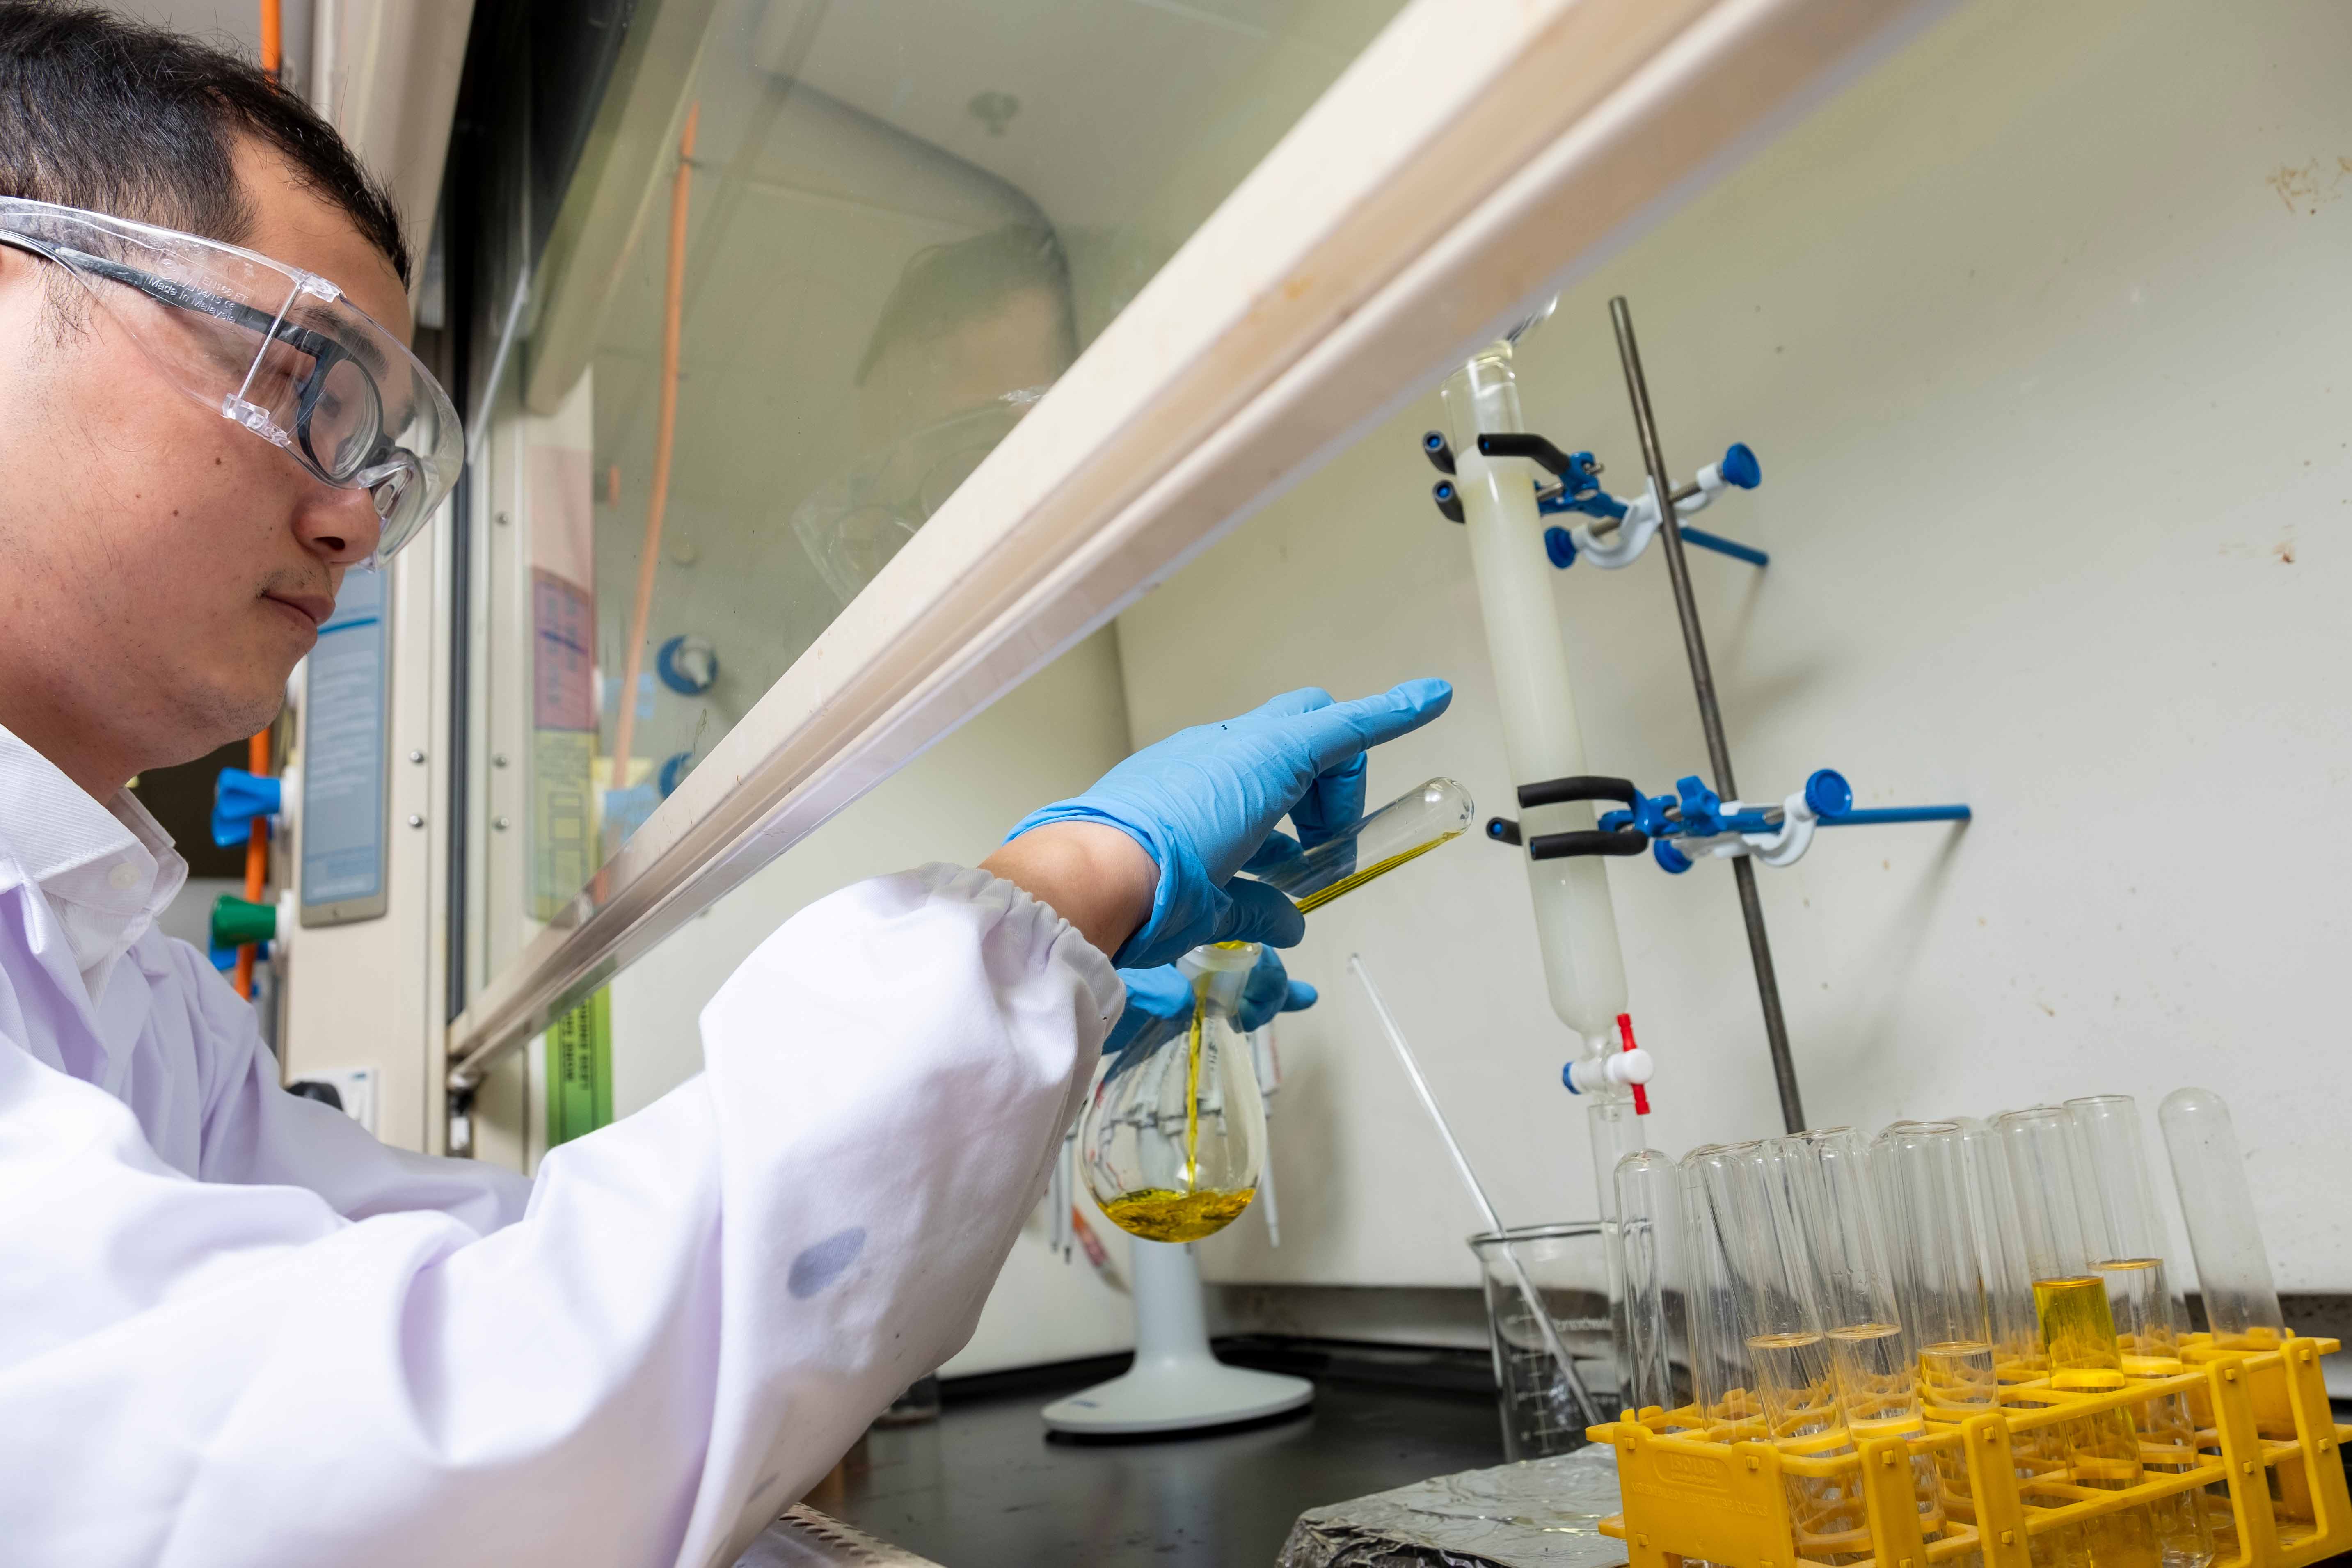 Research fellow Dr Huang Jingsheng from NTU Singapore’s School of Chemistry, Chemical Engineering and Biotechnology preparing new anti-brain cancer compounds in a fume hood 